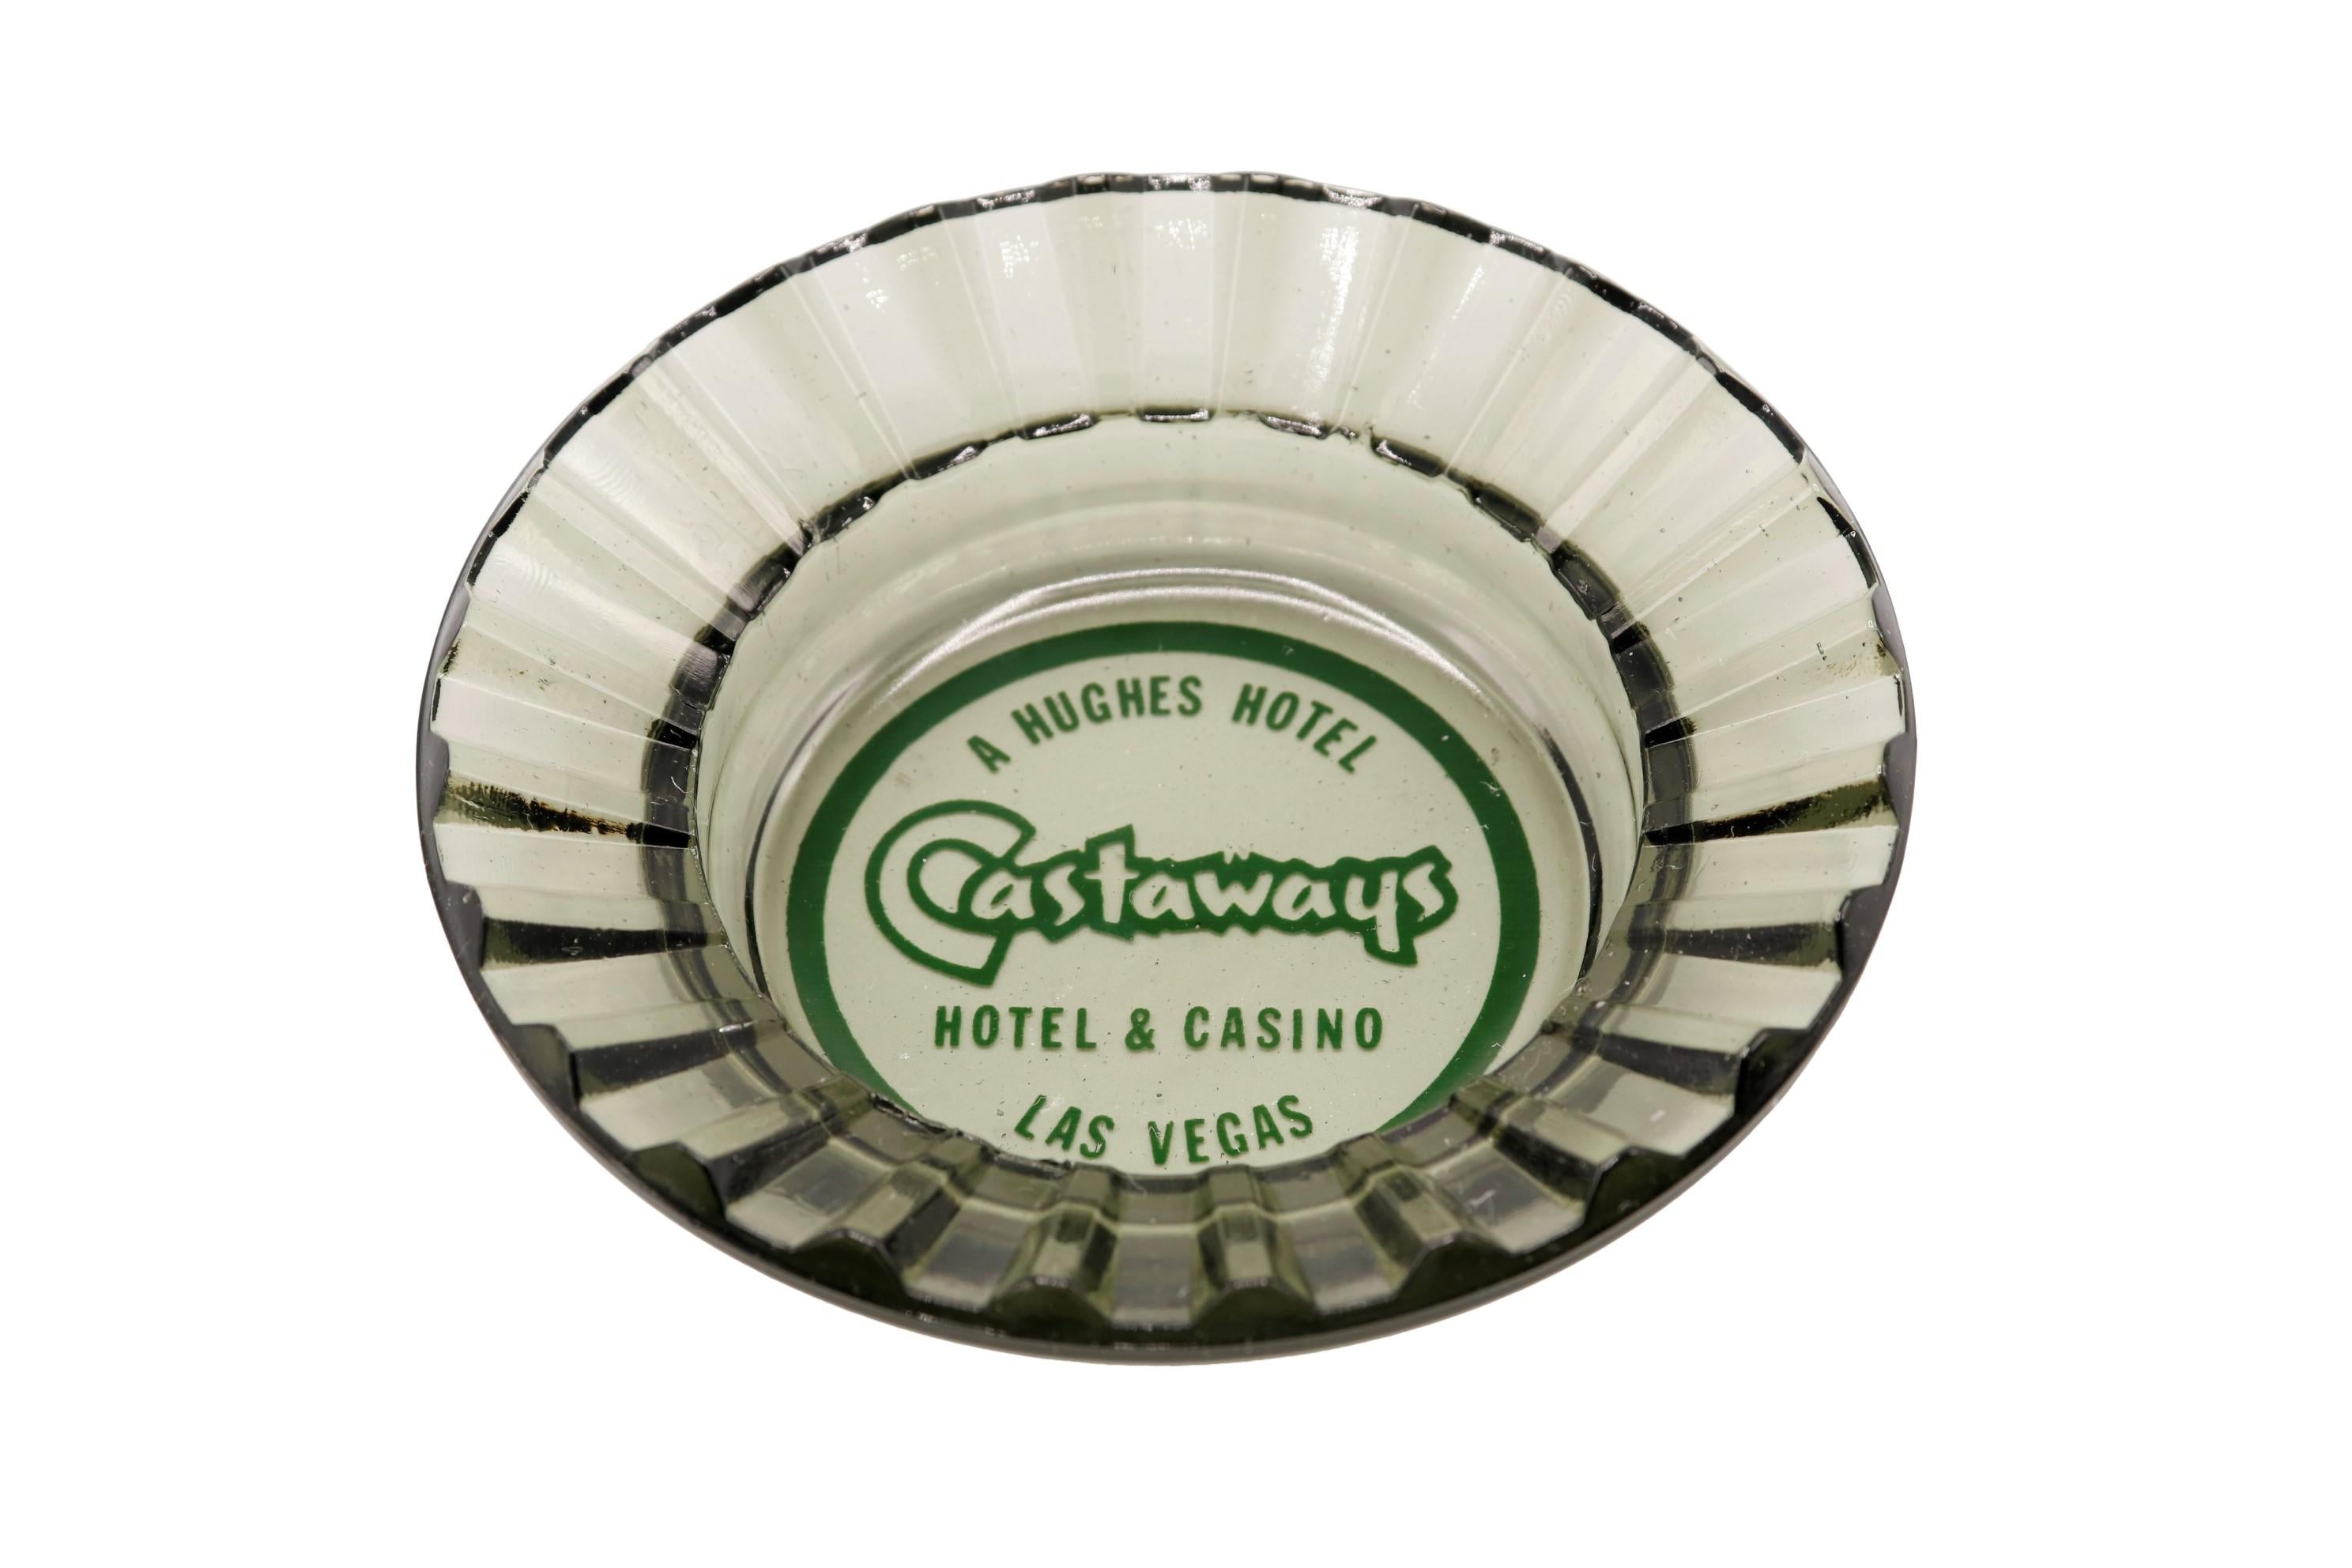 A gray tinted glass ashtray from The Castaways Hotel, a hotel and casino in Paradise, Las Vegas, Nevada. The center is printed with a green circle branded with the Castaways logo. The hotel was opened in 1963, purchased in 1967 by billionaire Howard